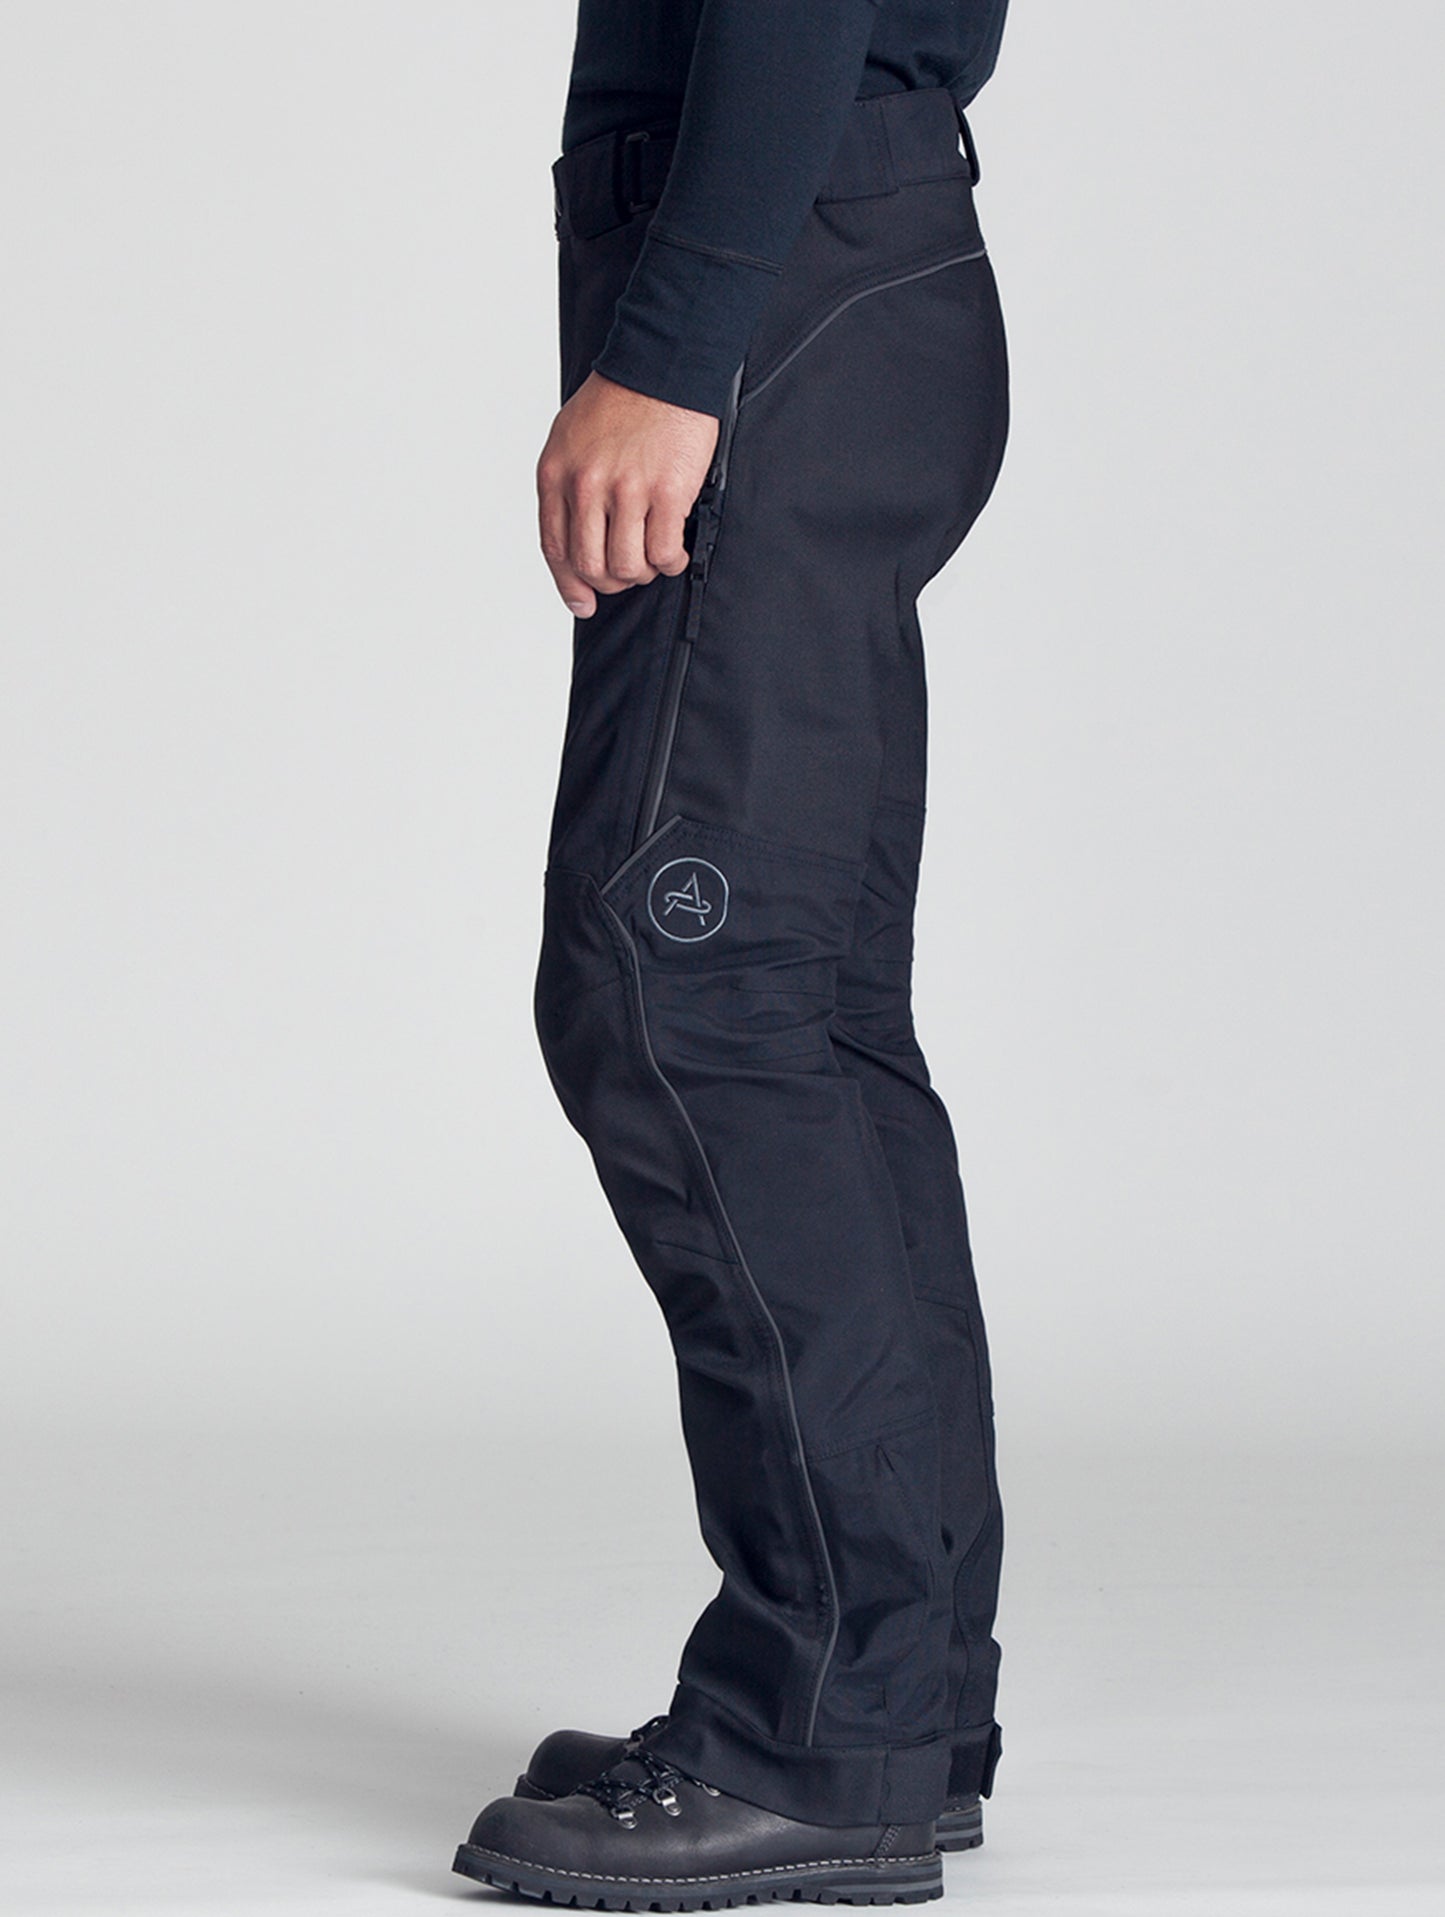 Expedition Motorcycle Pant - Jet Black